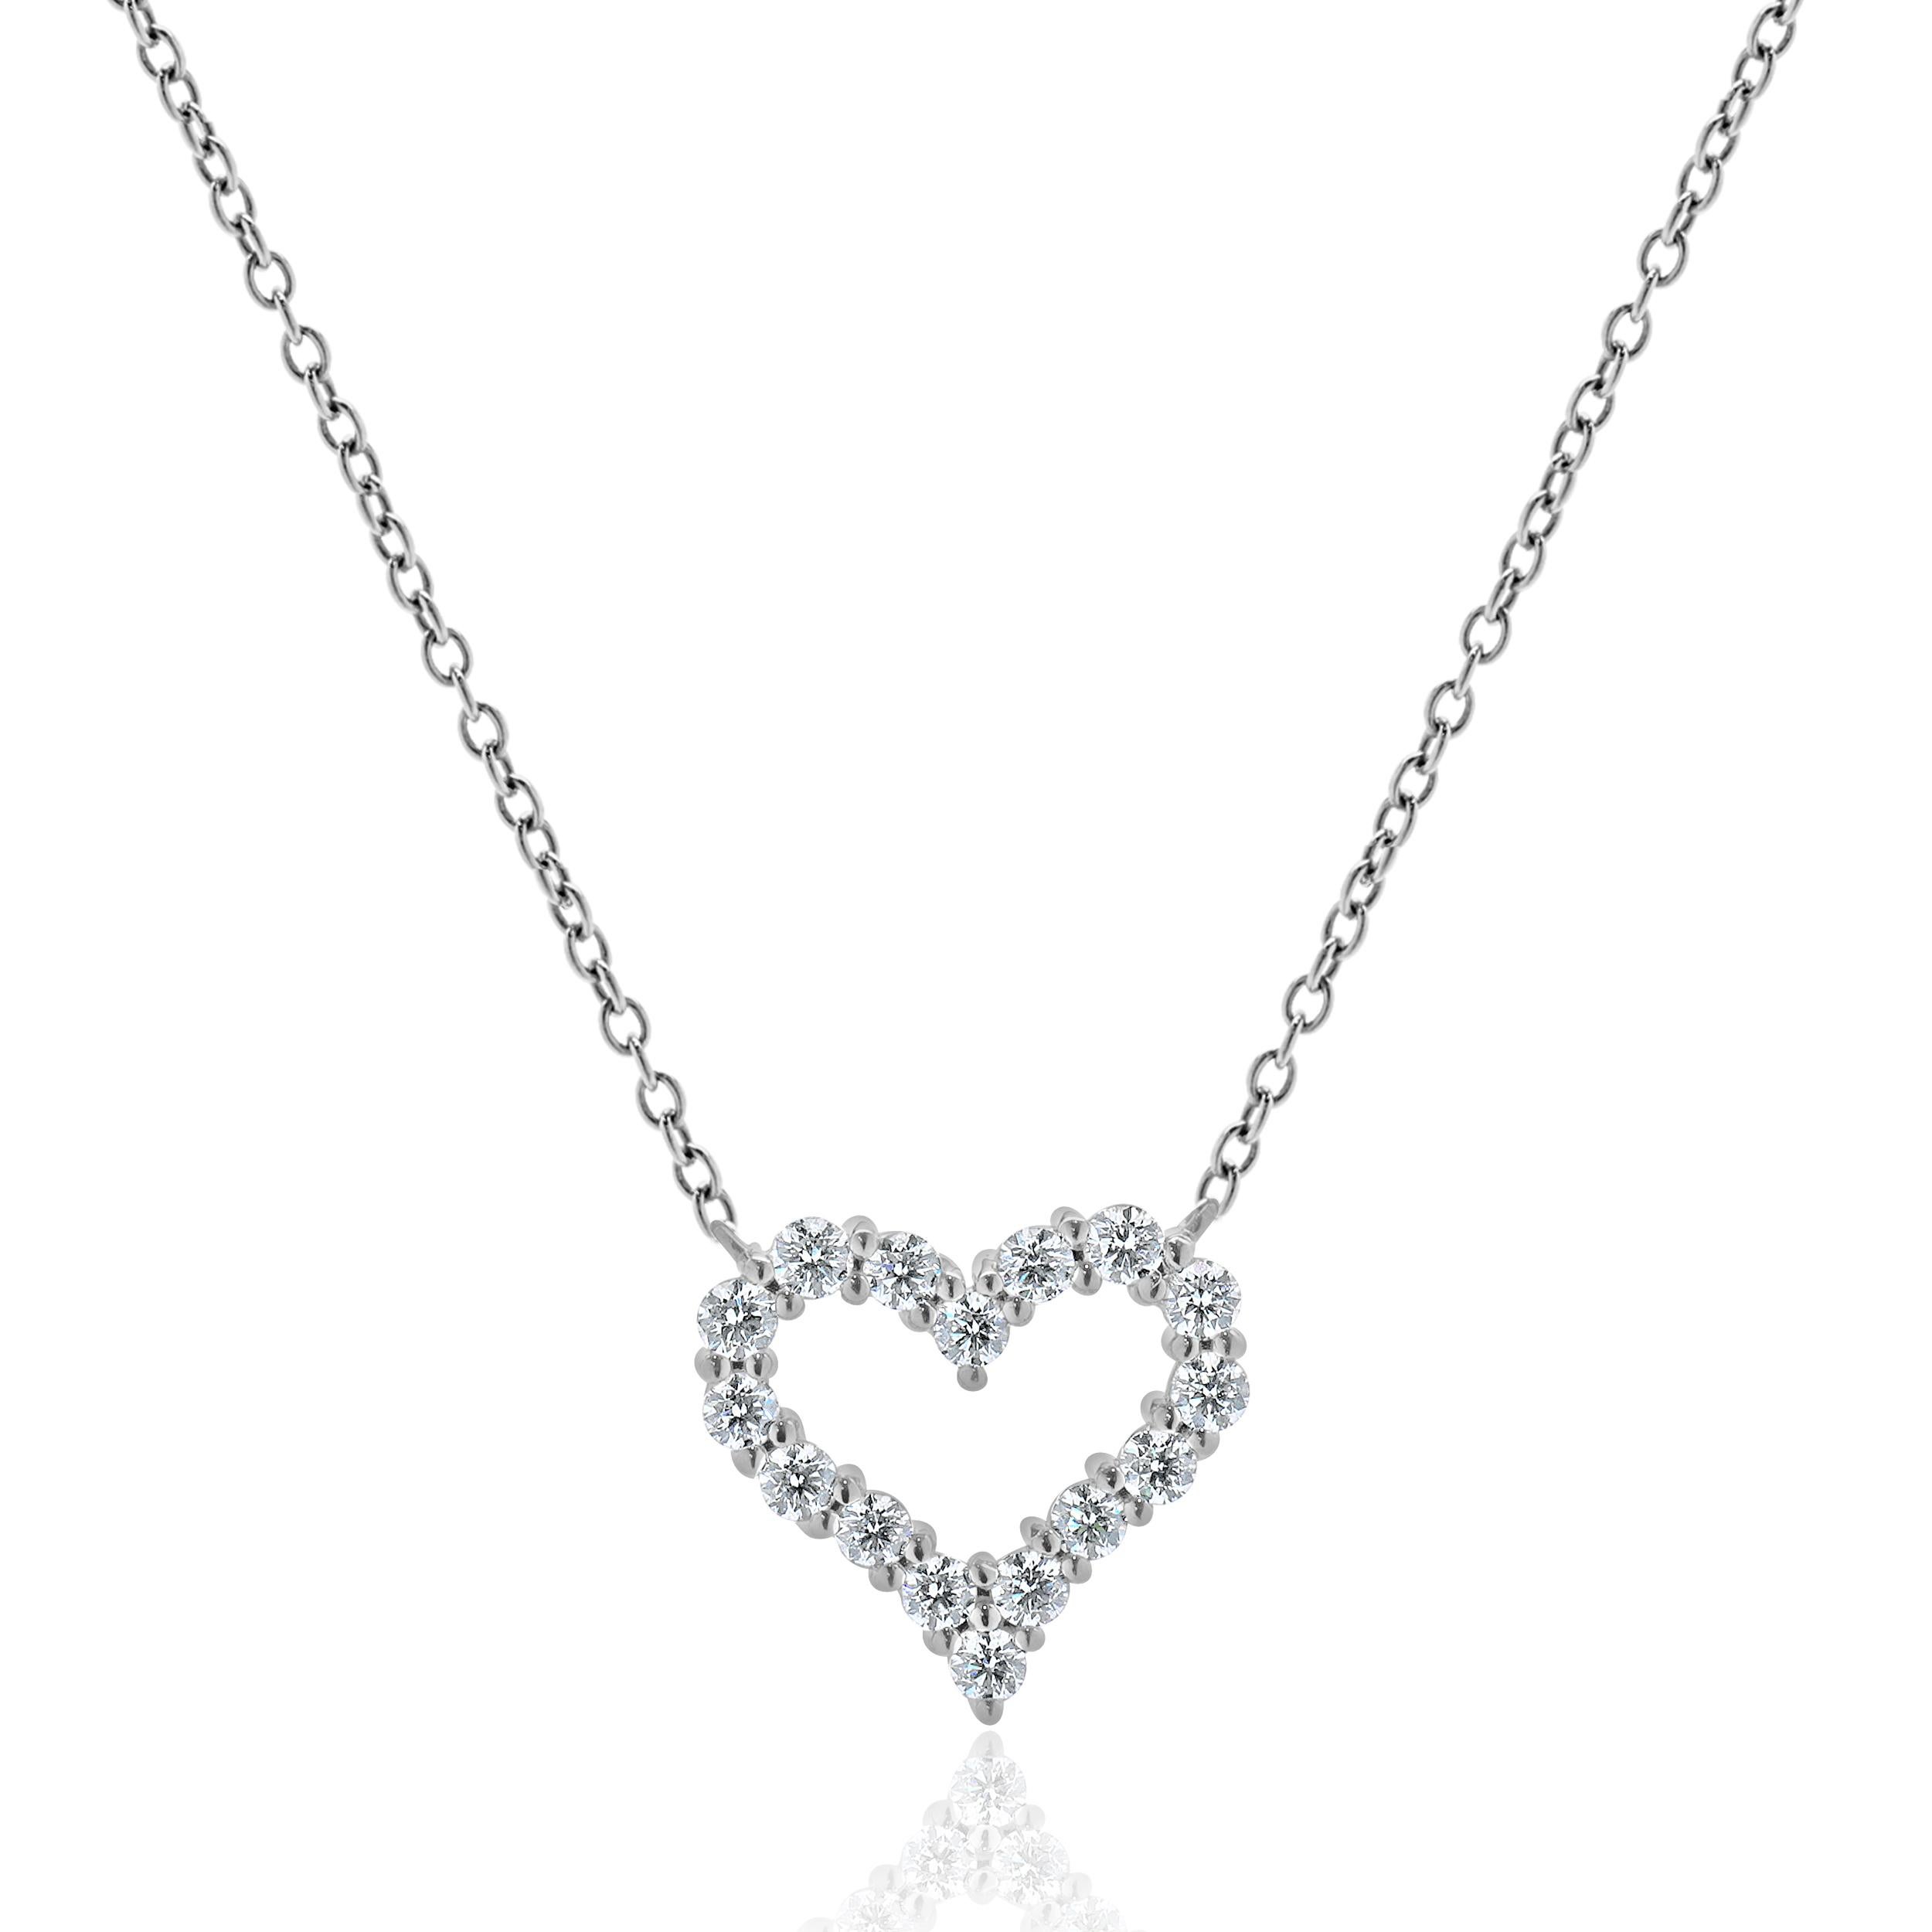 Designer: Tiffany & Co. 
Material: platinum
Diamond: 16 round brilliant cut = 0.25cttw
Color: H
Clarity: SI1-2
Dimensions: necklace measures 18-inches
Weight: 3.21 grams
